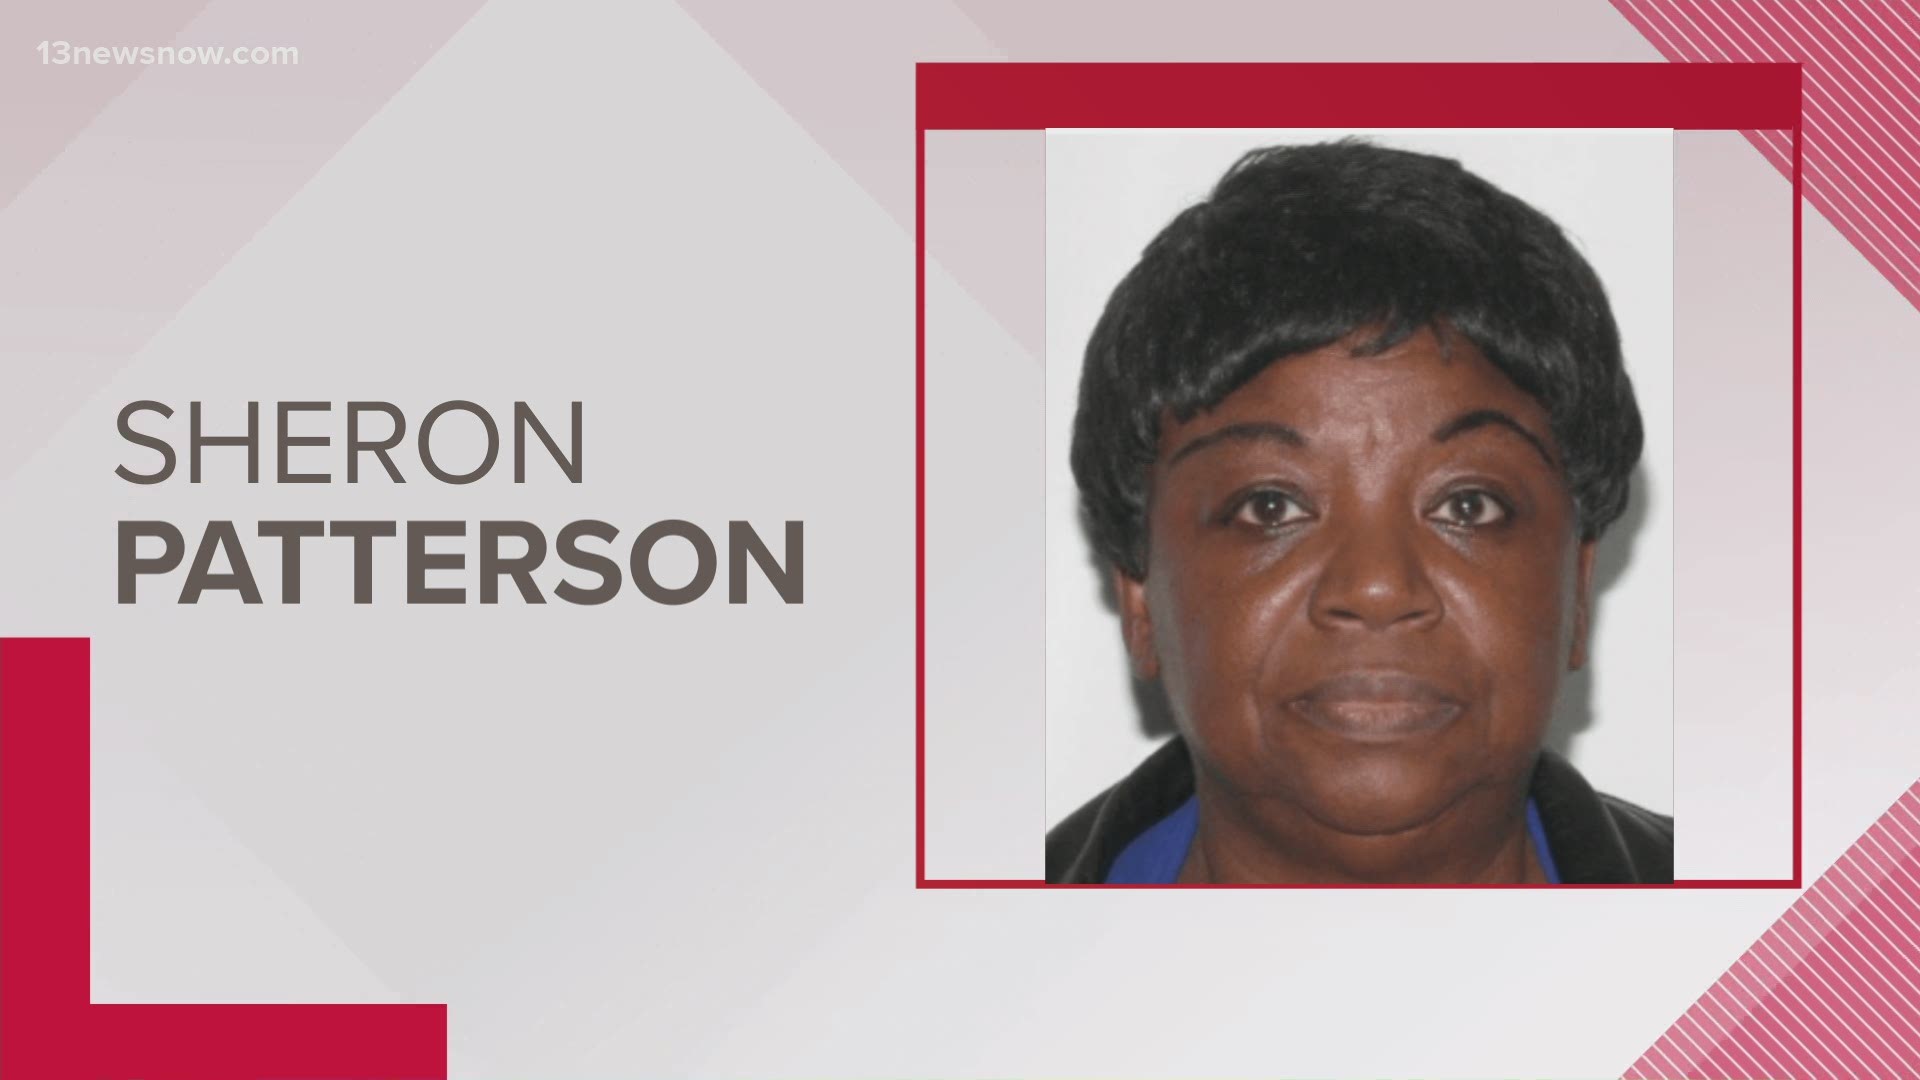 Norfolk police are looking for 62-year-old Sheron Patterson who went missing the morning of Feb. 24. She may need medical attention.